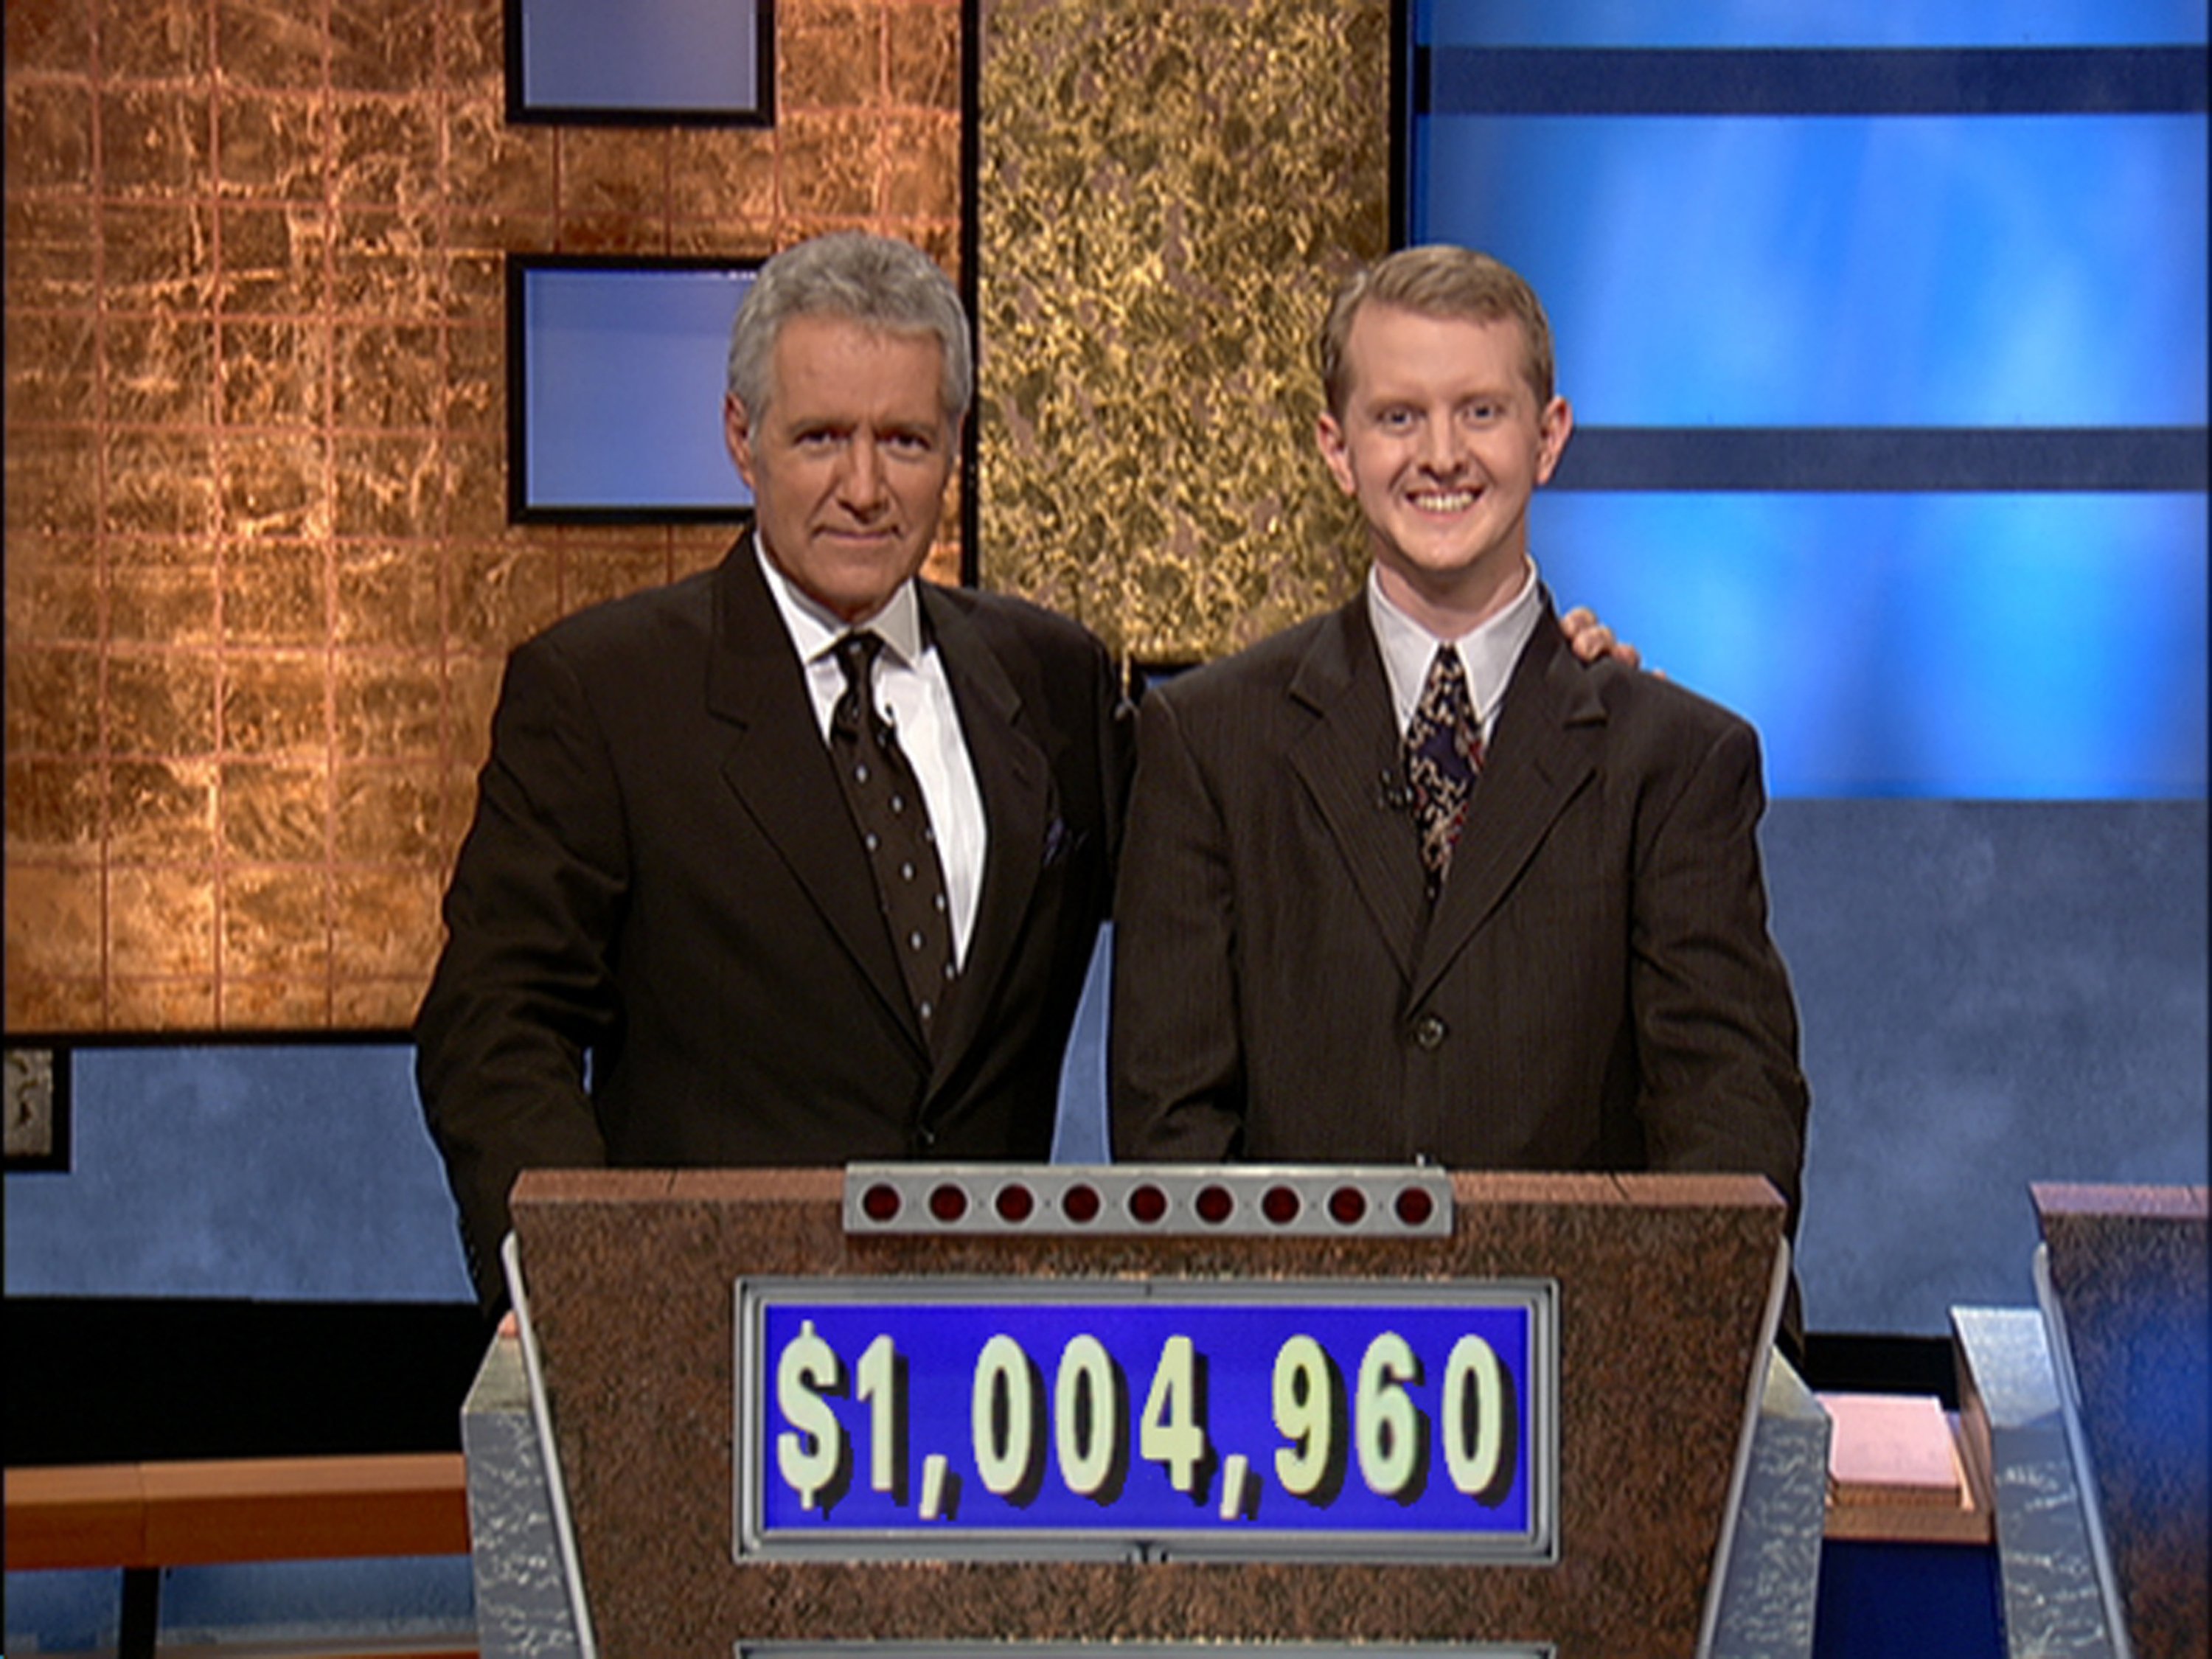 The late 'Jeopardy!' host Alex Trebek with the show's winningest contestant, Ken Jennings, in 2004.